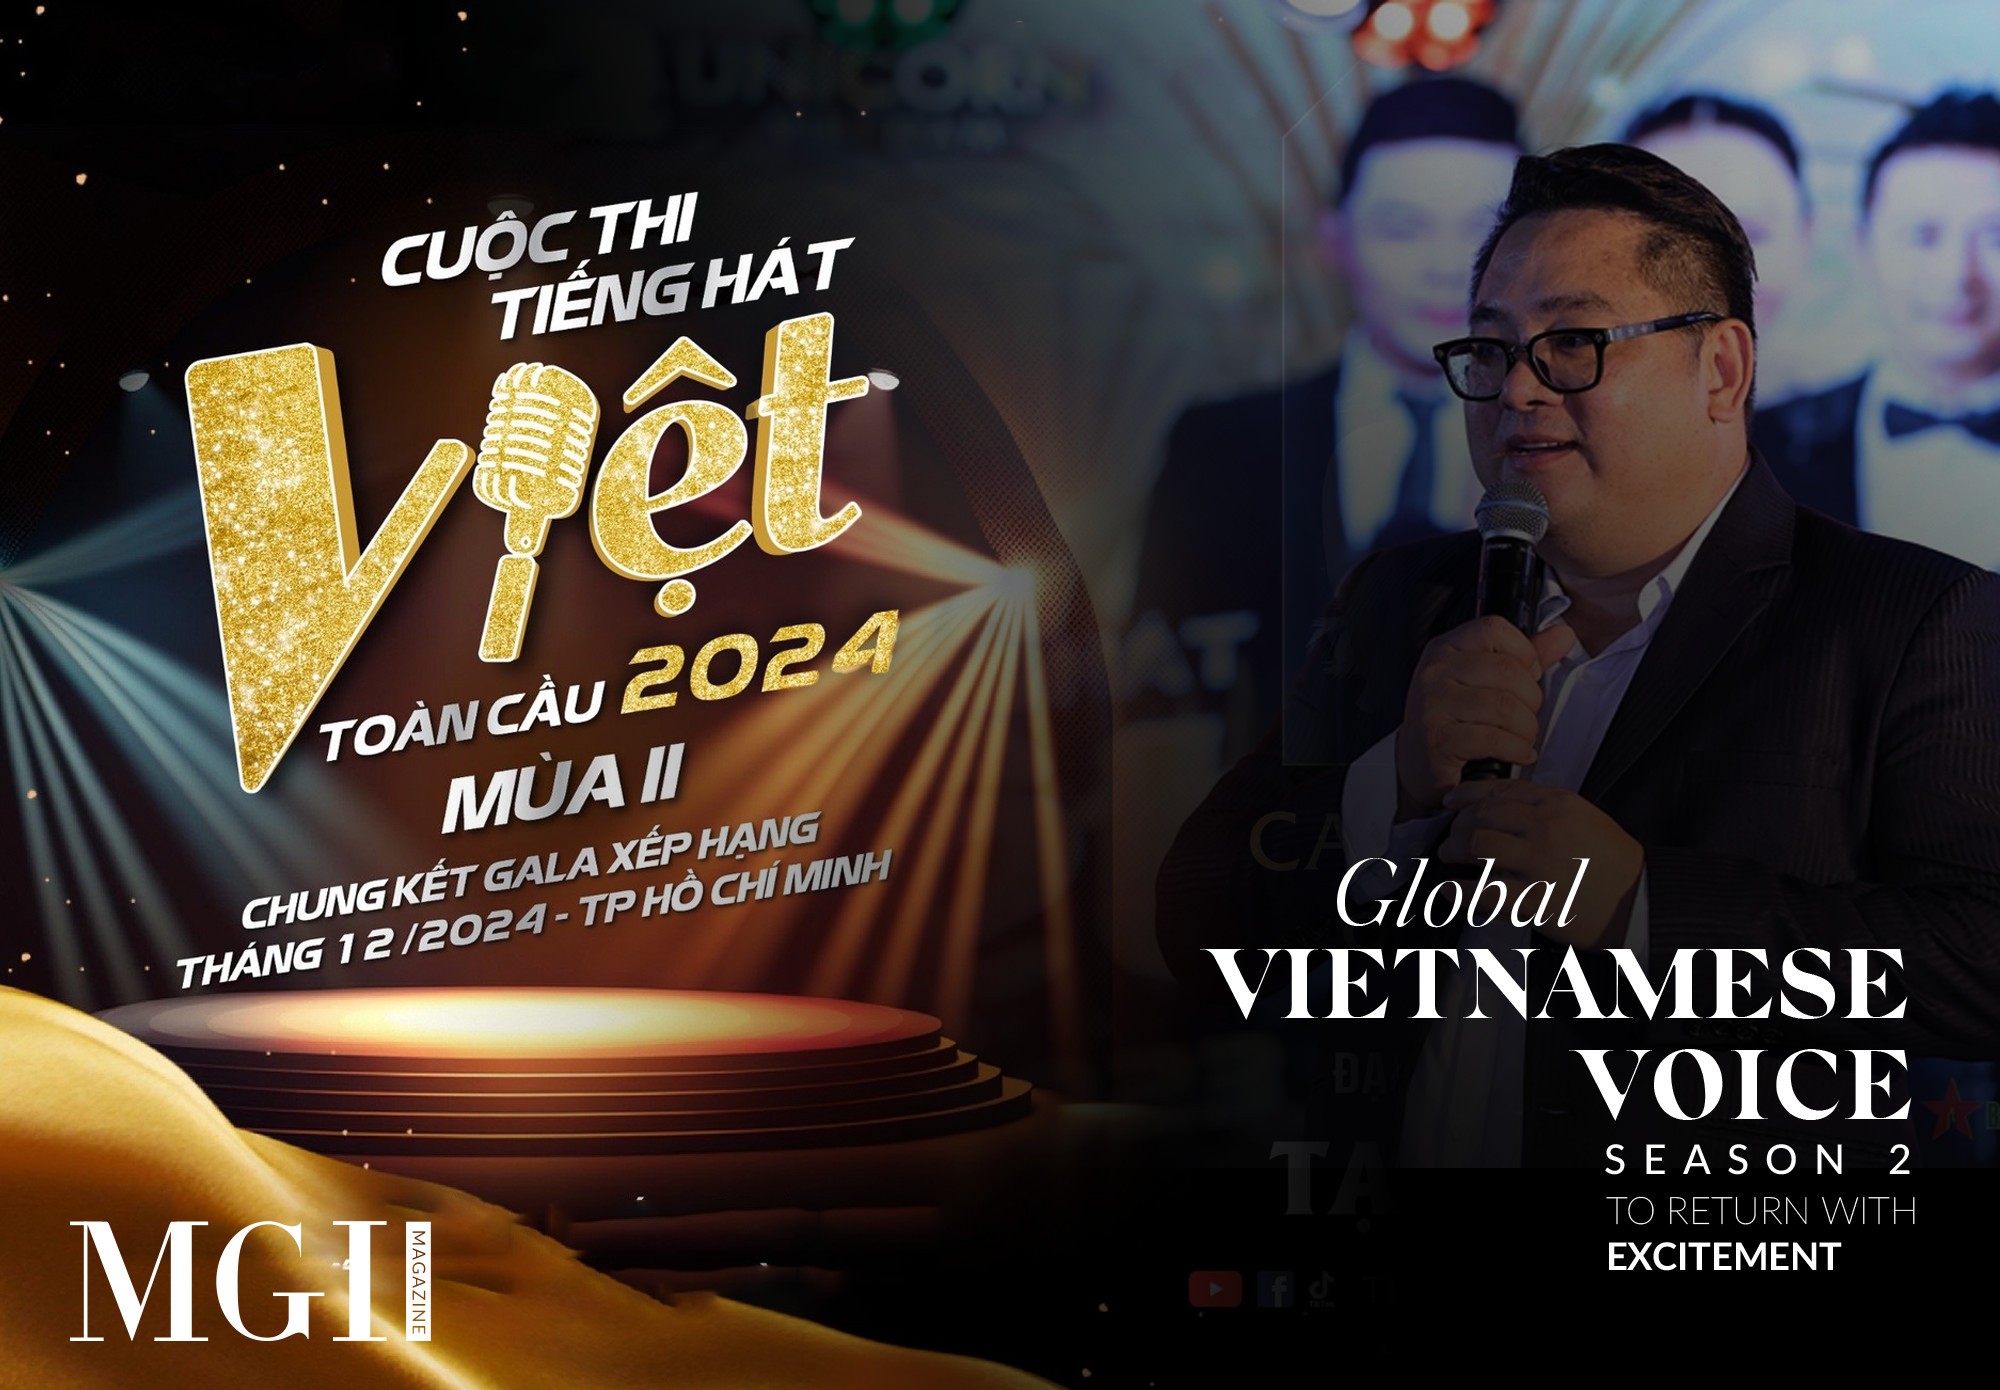 Global Vietnamese Voice Season 2 to return with excitement